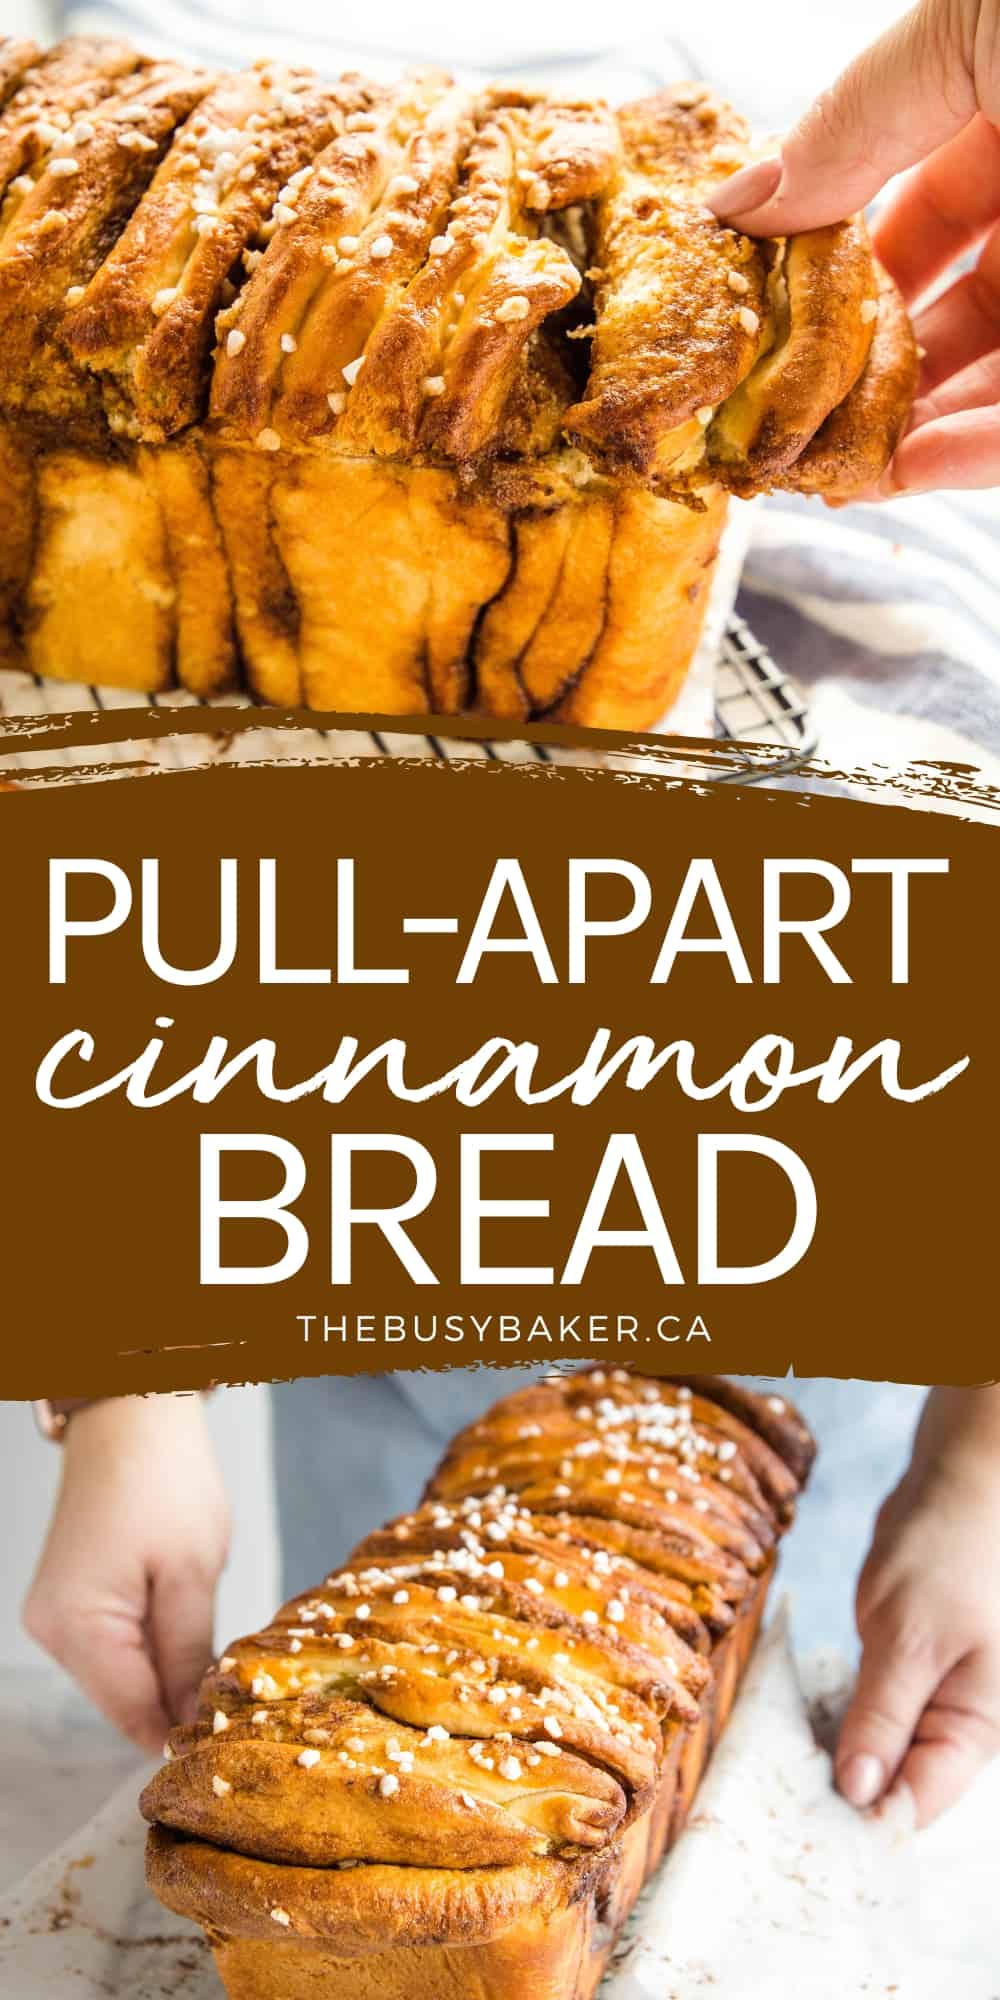 This Cinnamon Sugar Pull Apart Bread is the perfect sweet bread made from layers of soft, sweet dough with a buttery cinnamon filling! Recipe from thebusybaker.ca! #pullapartbread #cinnamonbread #dessert #treat #homemade #baking via @busybakerblog